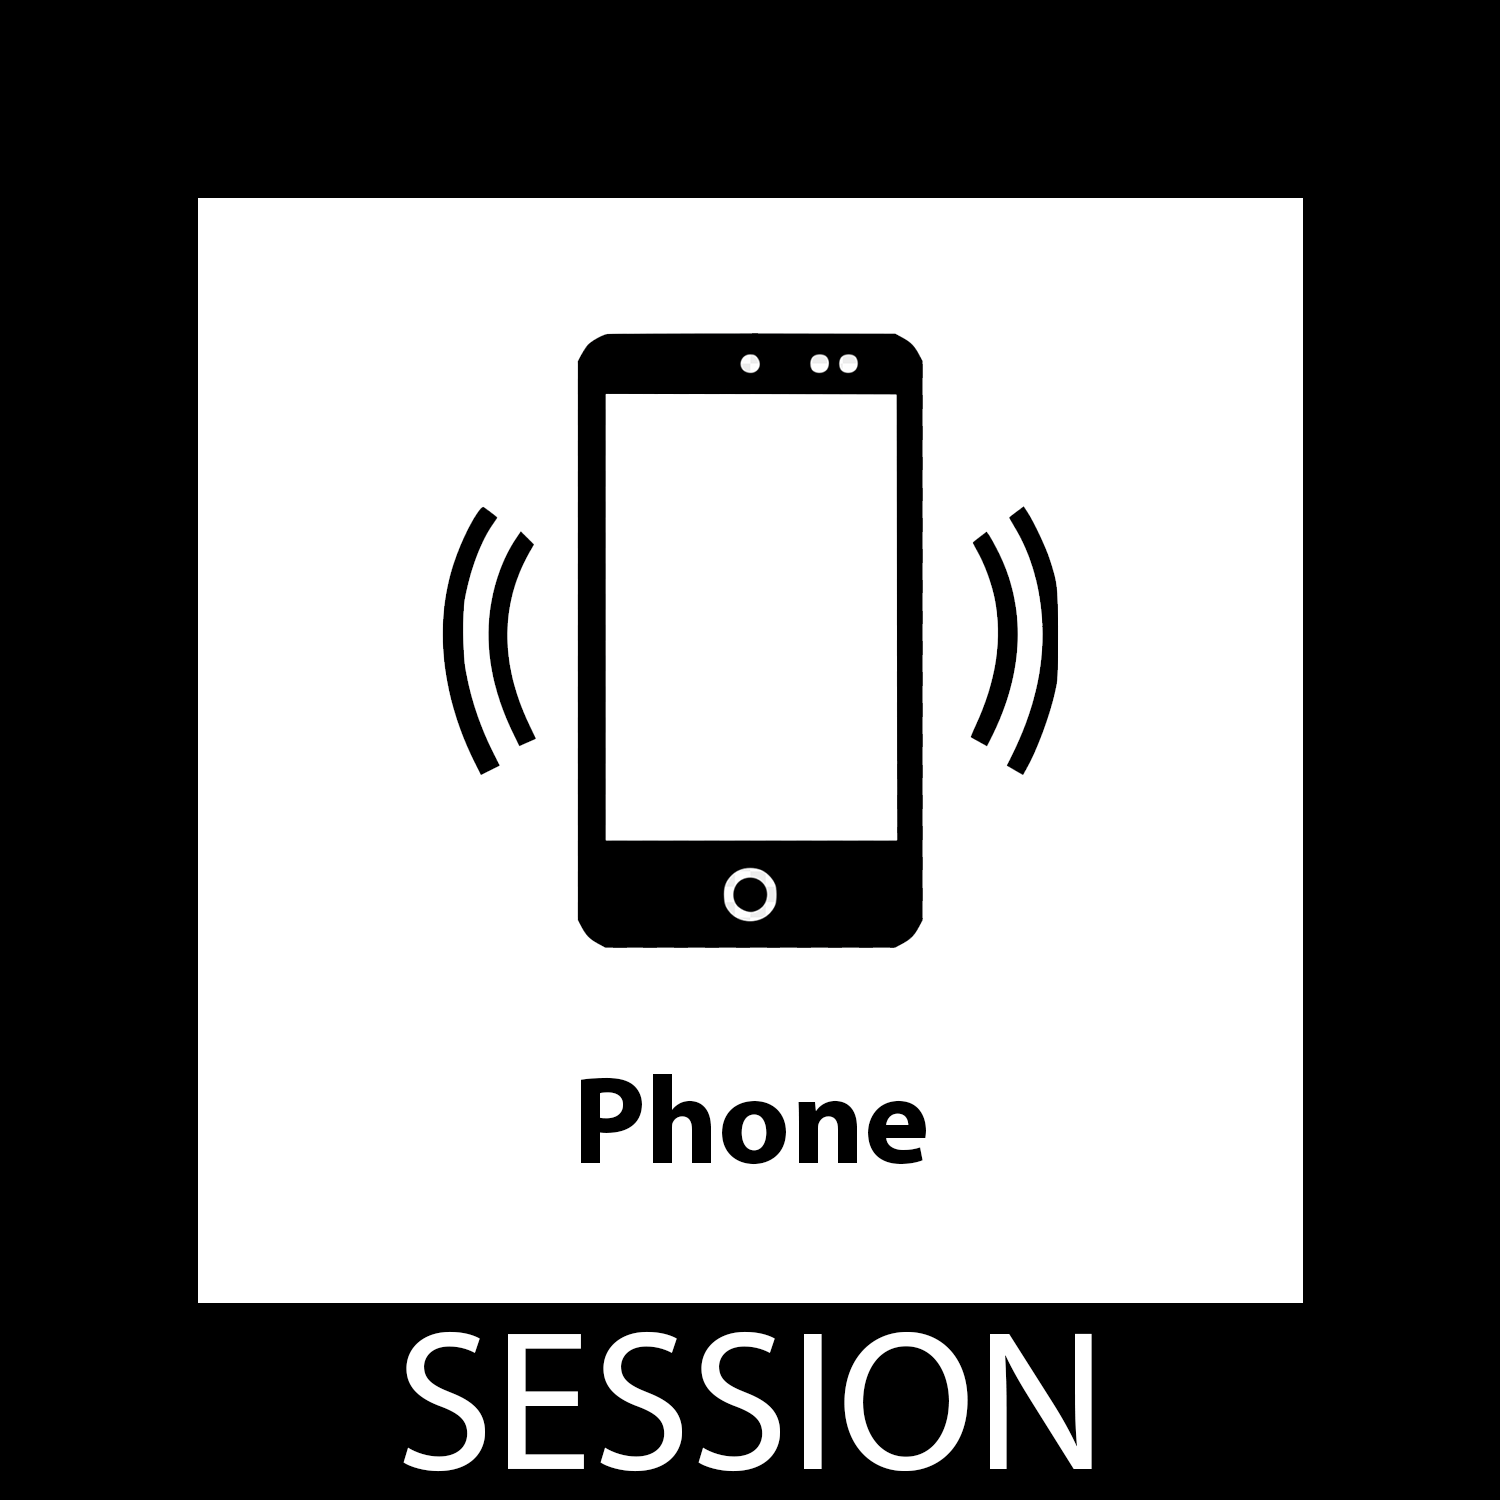 Phone (30 Minutes) Session